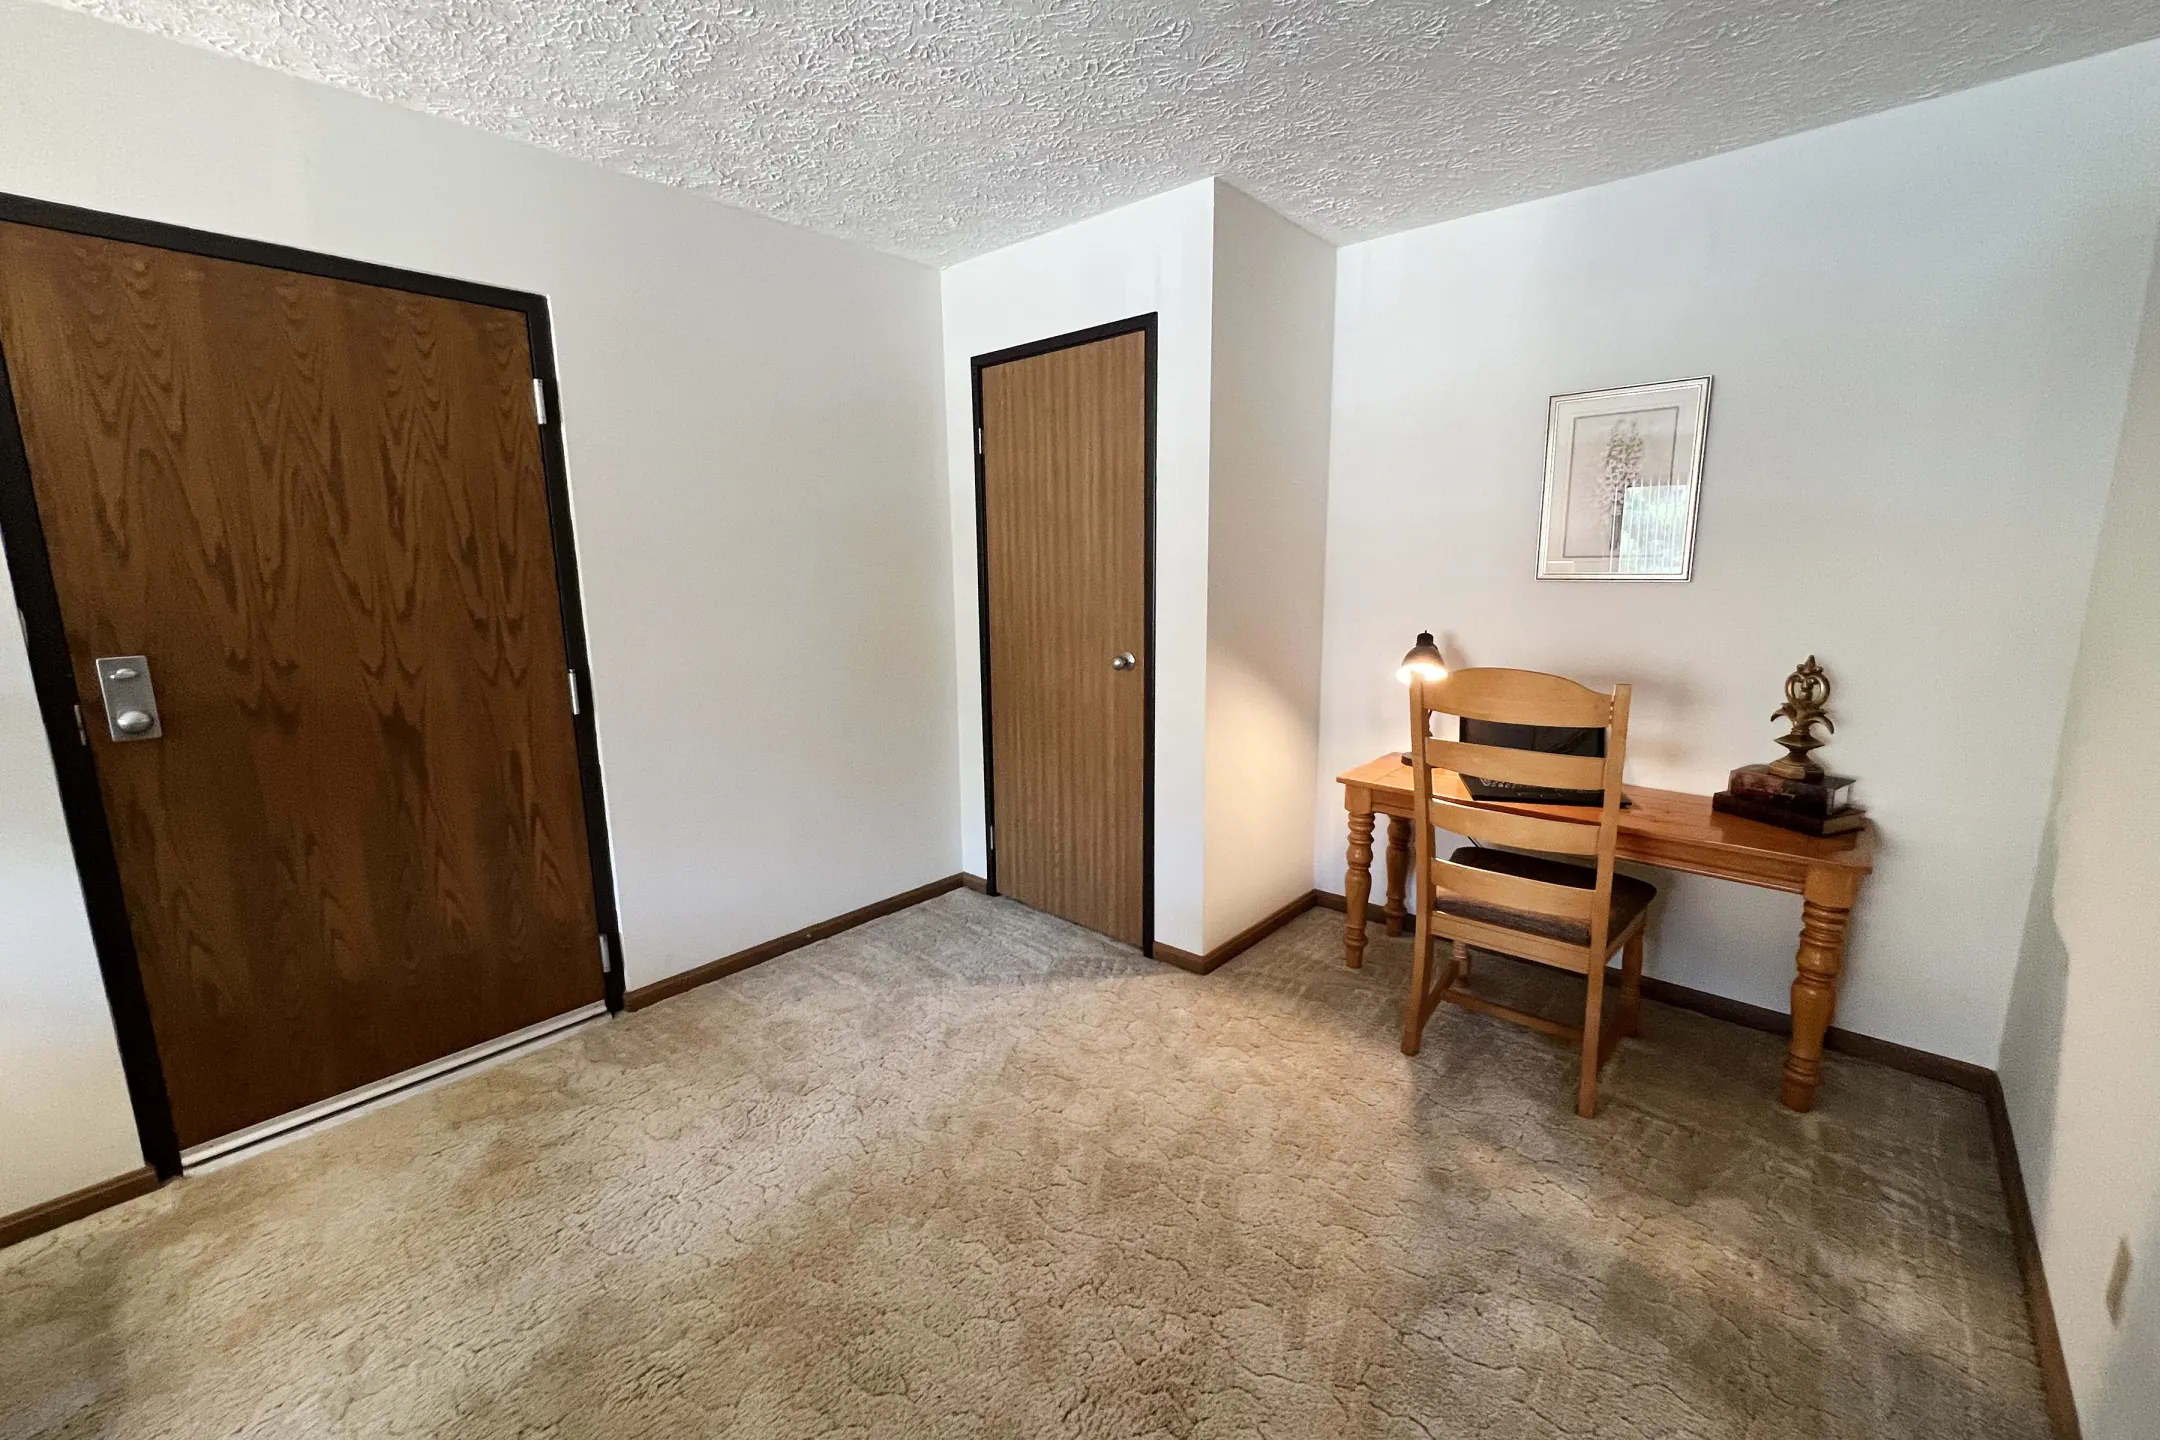 Bedroom - Colonial Village Apartments - Crescent Springs, KY